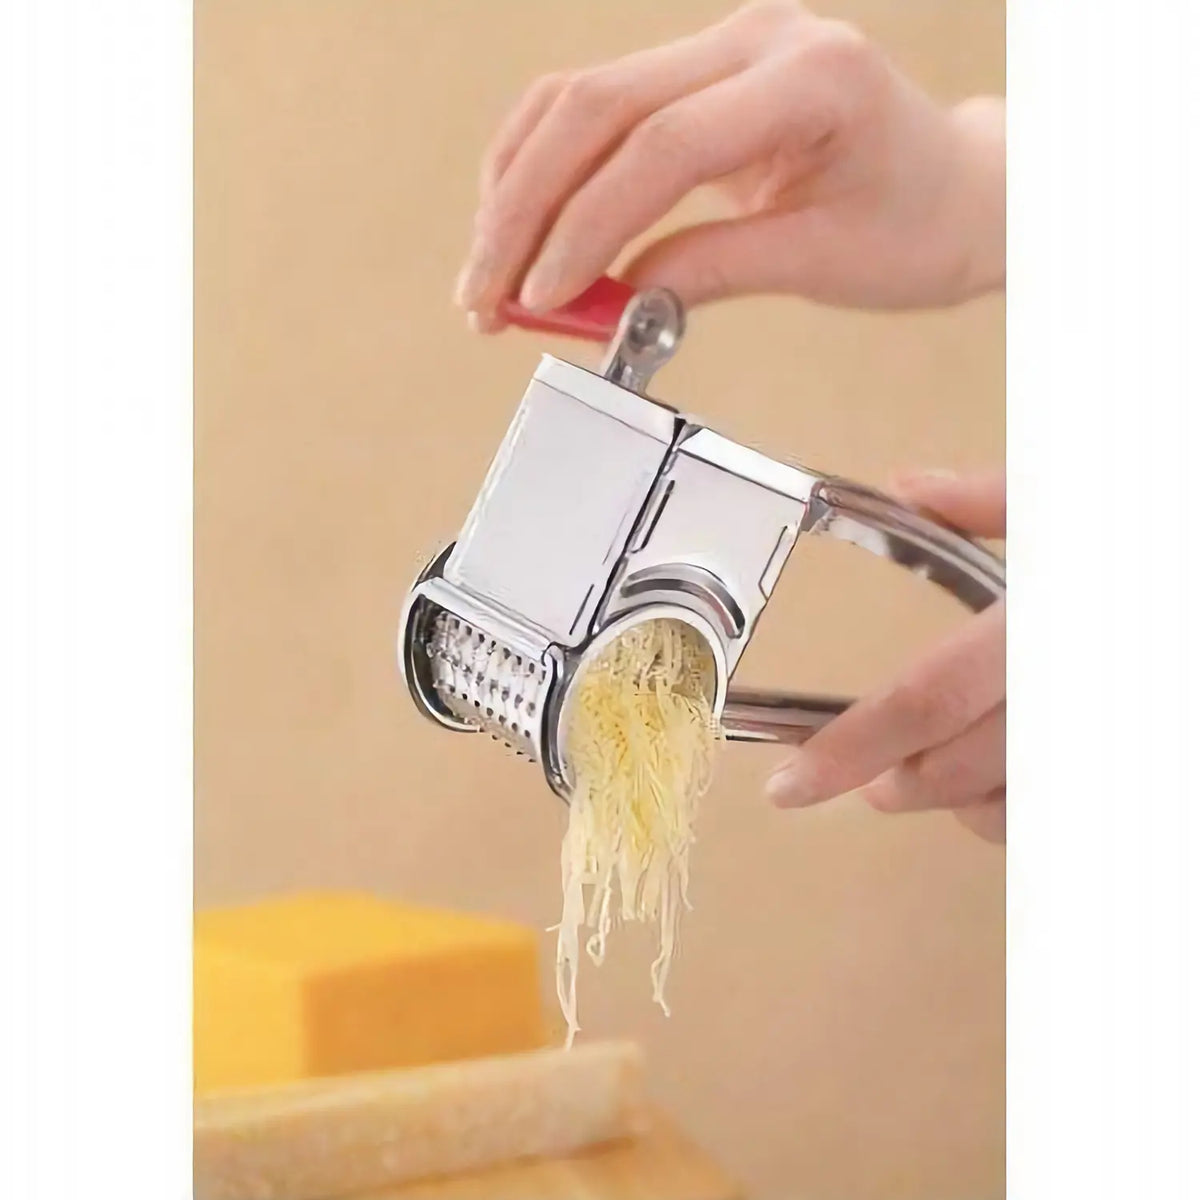 Rotary Cheese Grater with Handle Three Hole Type Rotary Grater